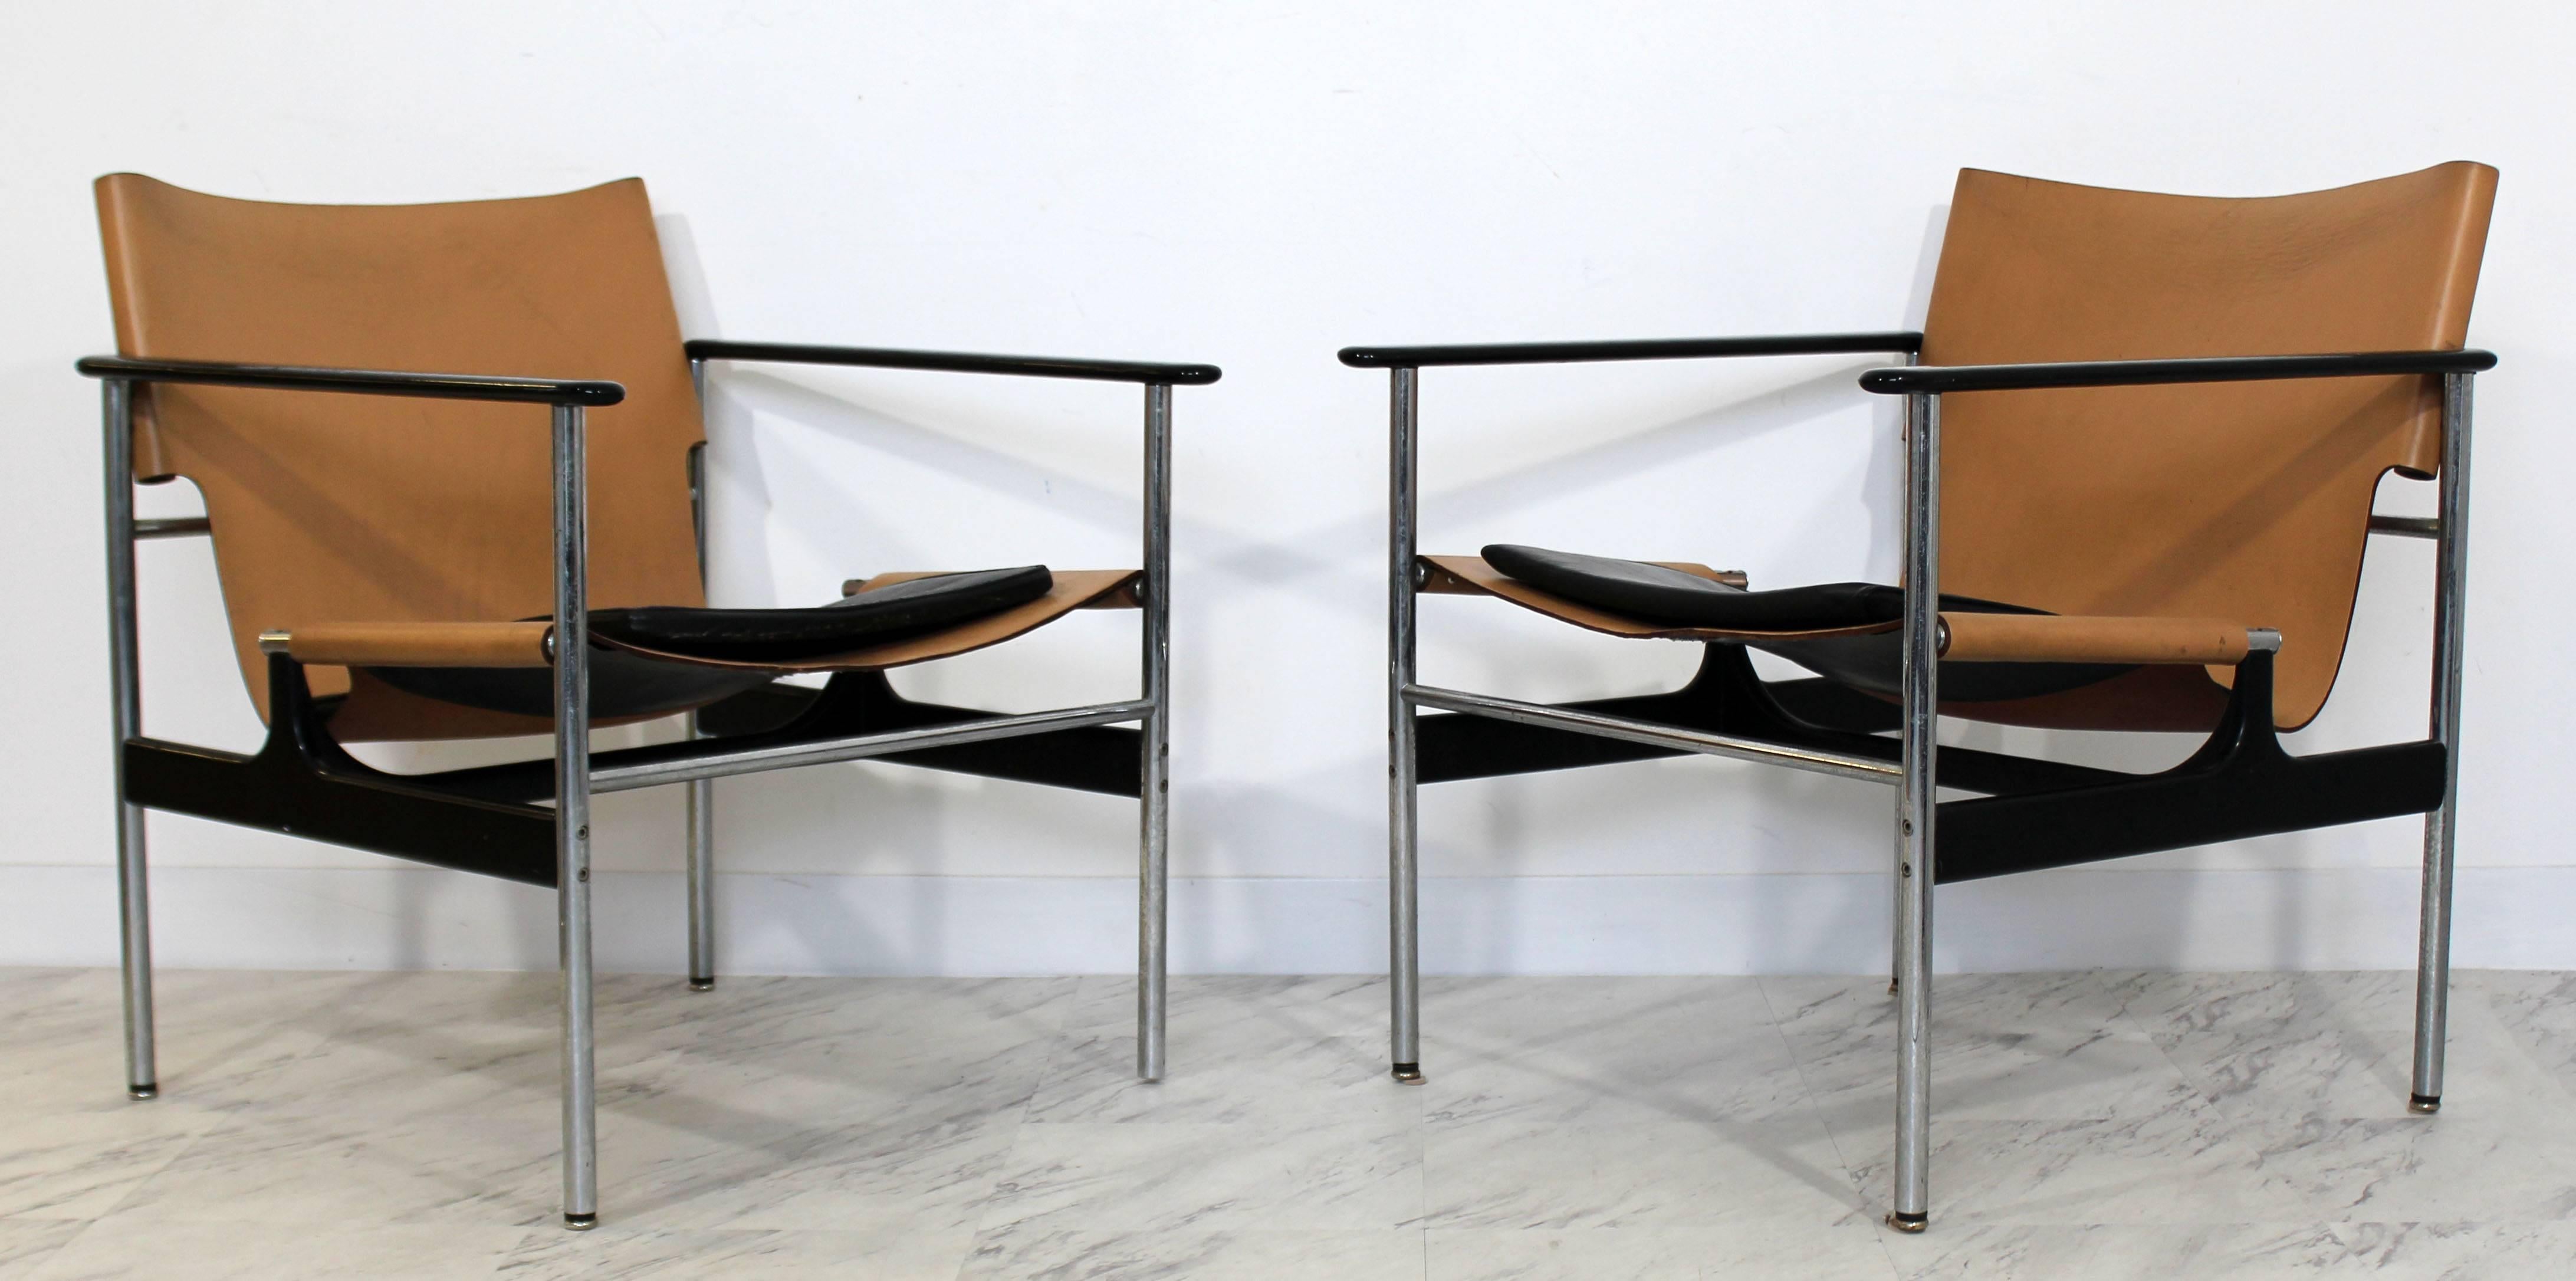 For your consideration is a unique pair of arm chairs, by Charles Pollock for Knoll Model #657, on chrome frames and with brown leather upholstery. In good vintage condition. The dimensions are 25